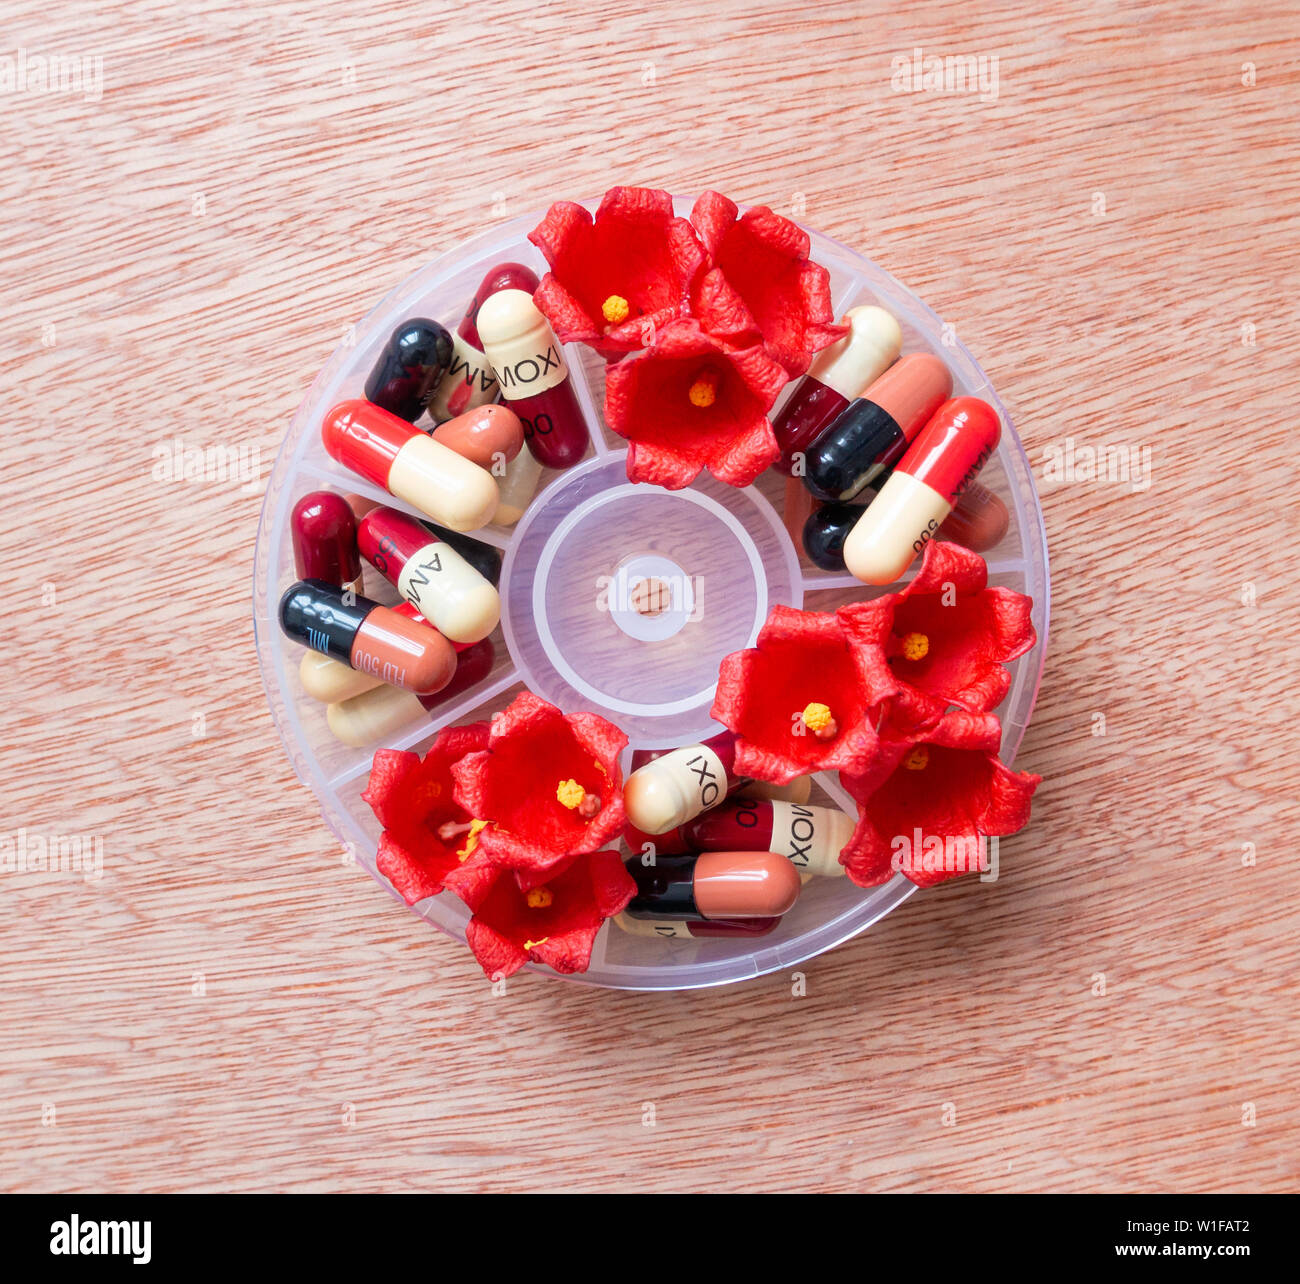 Homeopathy concept image: weekly pill organizer with flowers and antibiotics Stock Photo